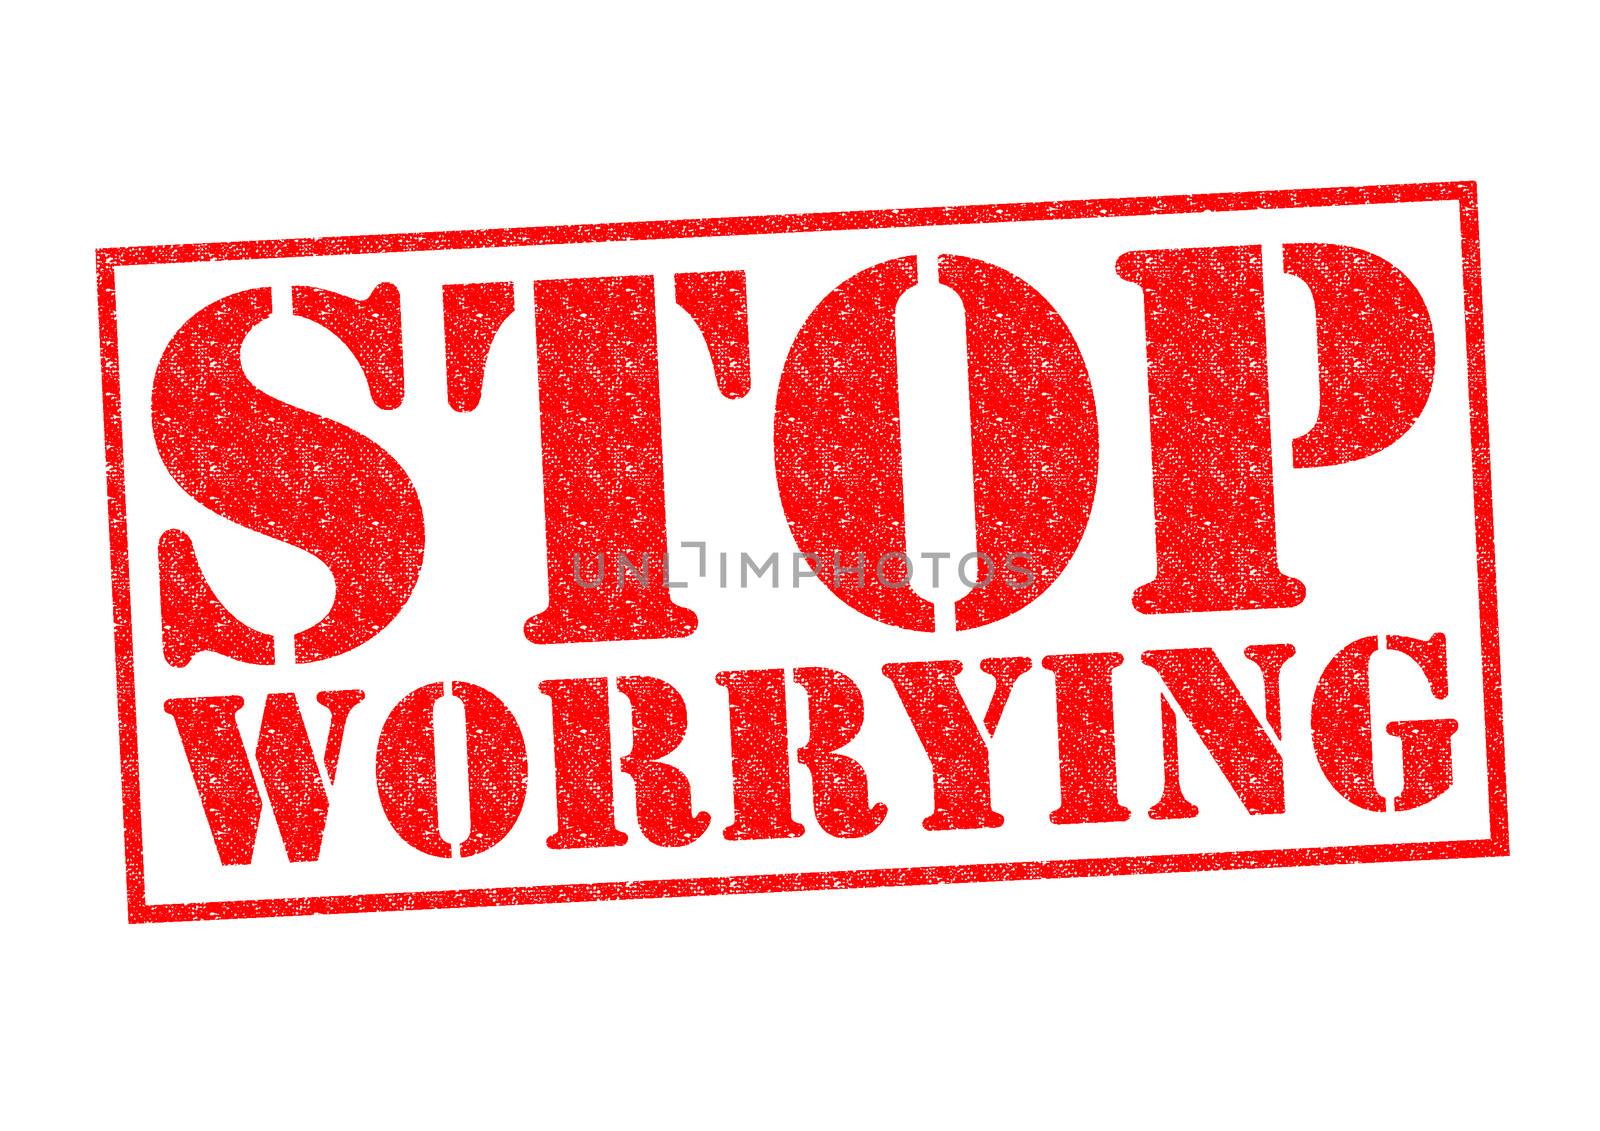 STOP WORRYING Rubber Stamp over a white background.